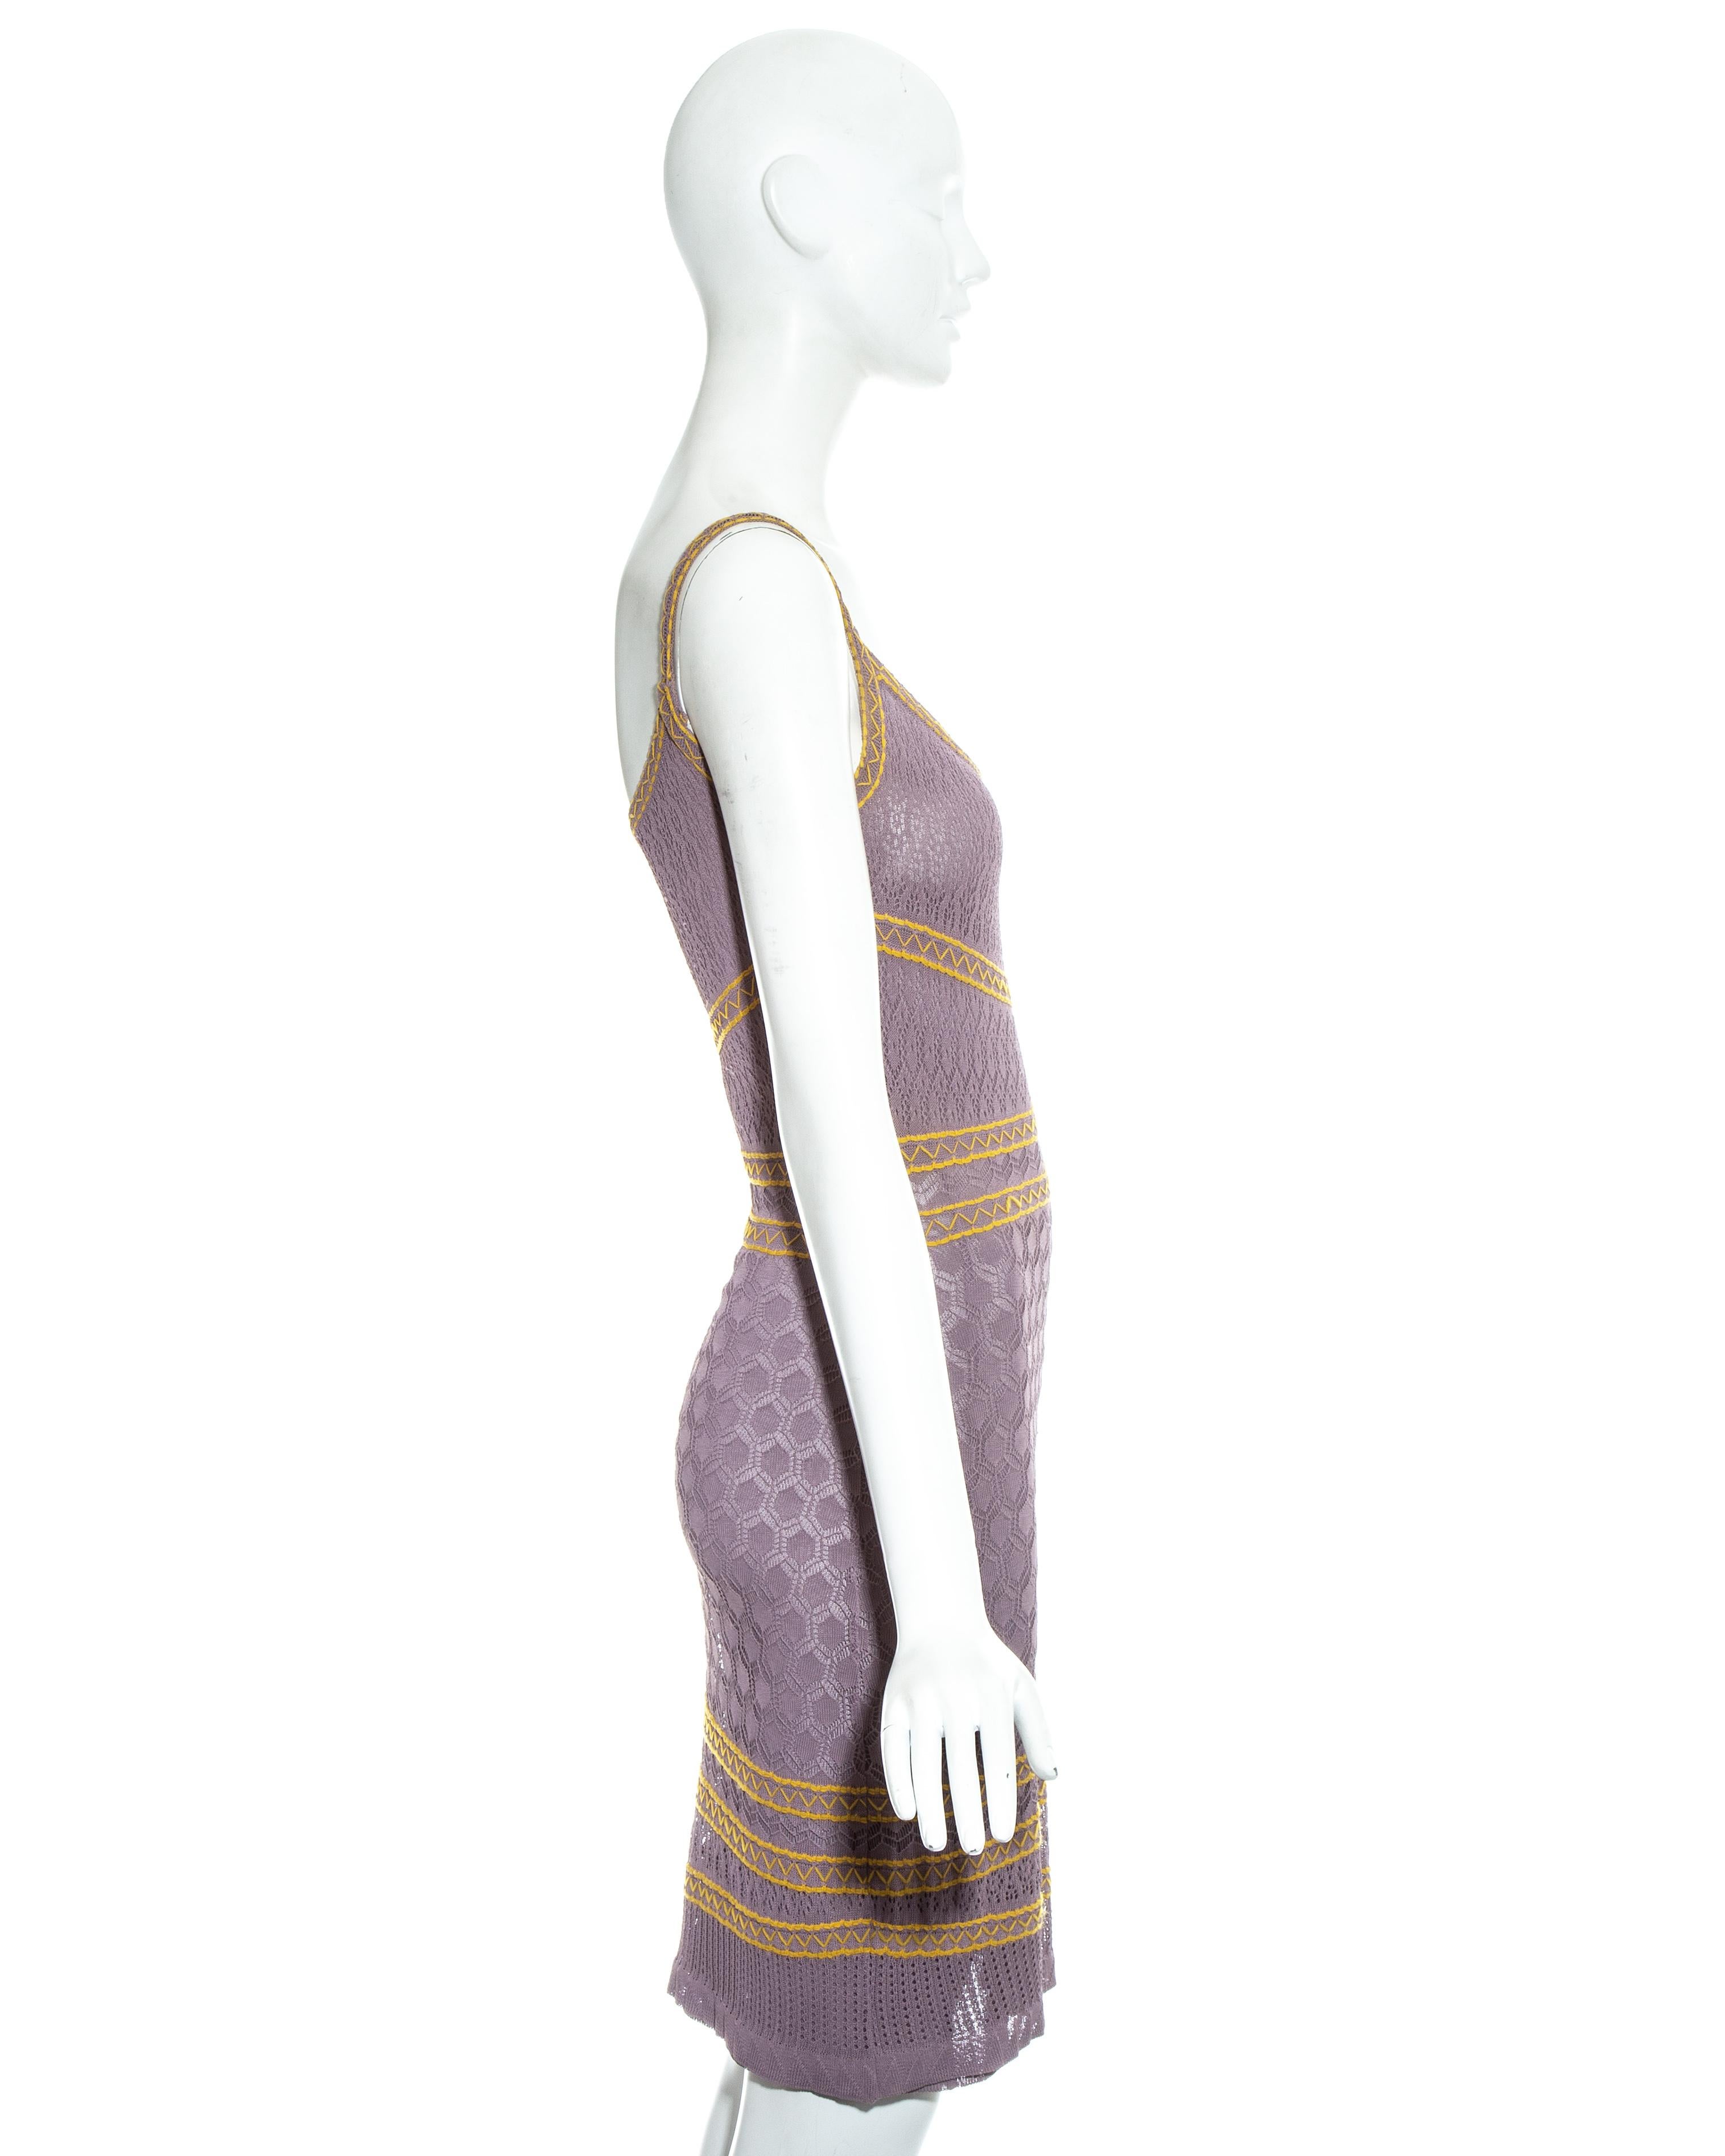 Women's Christian Dior by John Galliano violet knitted slip dress, ss 2000